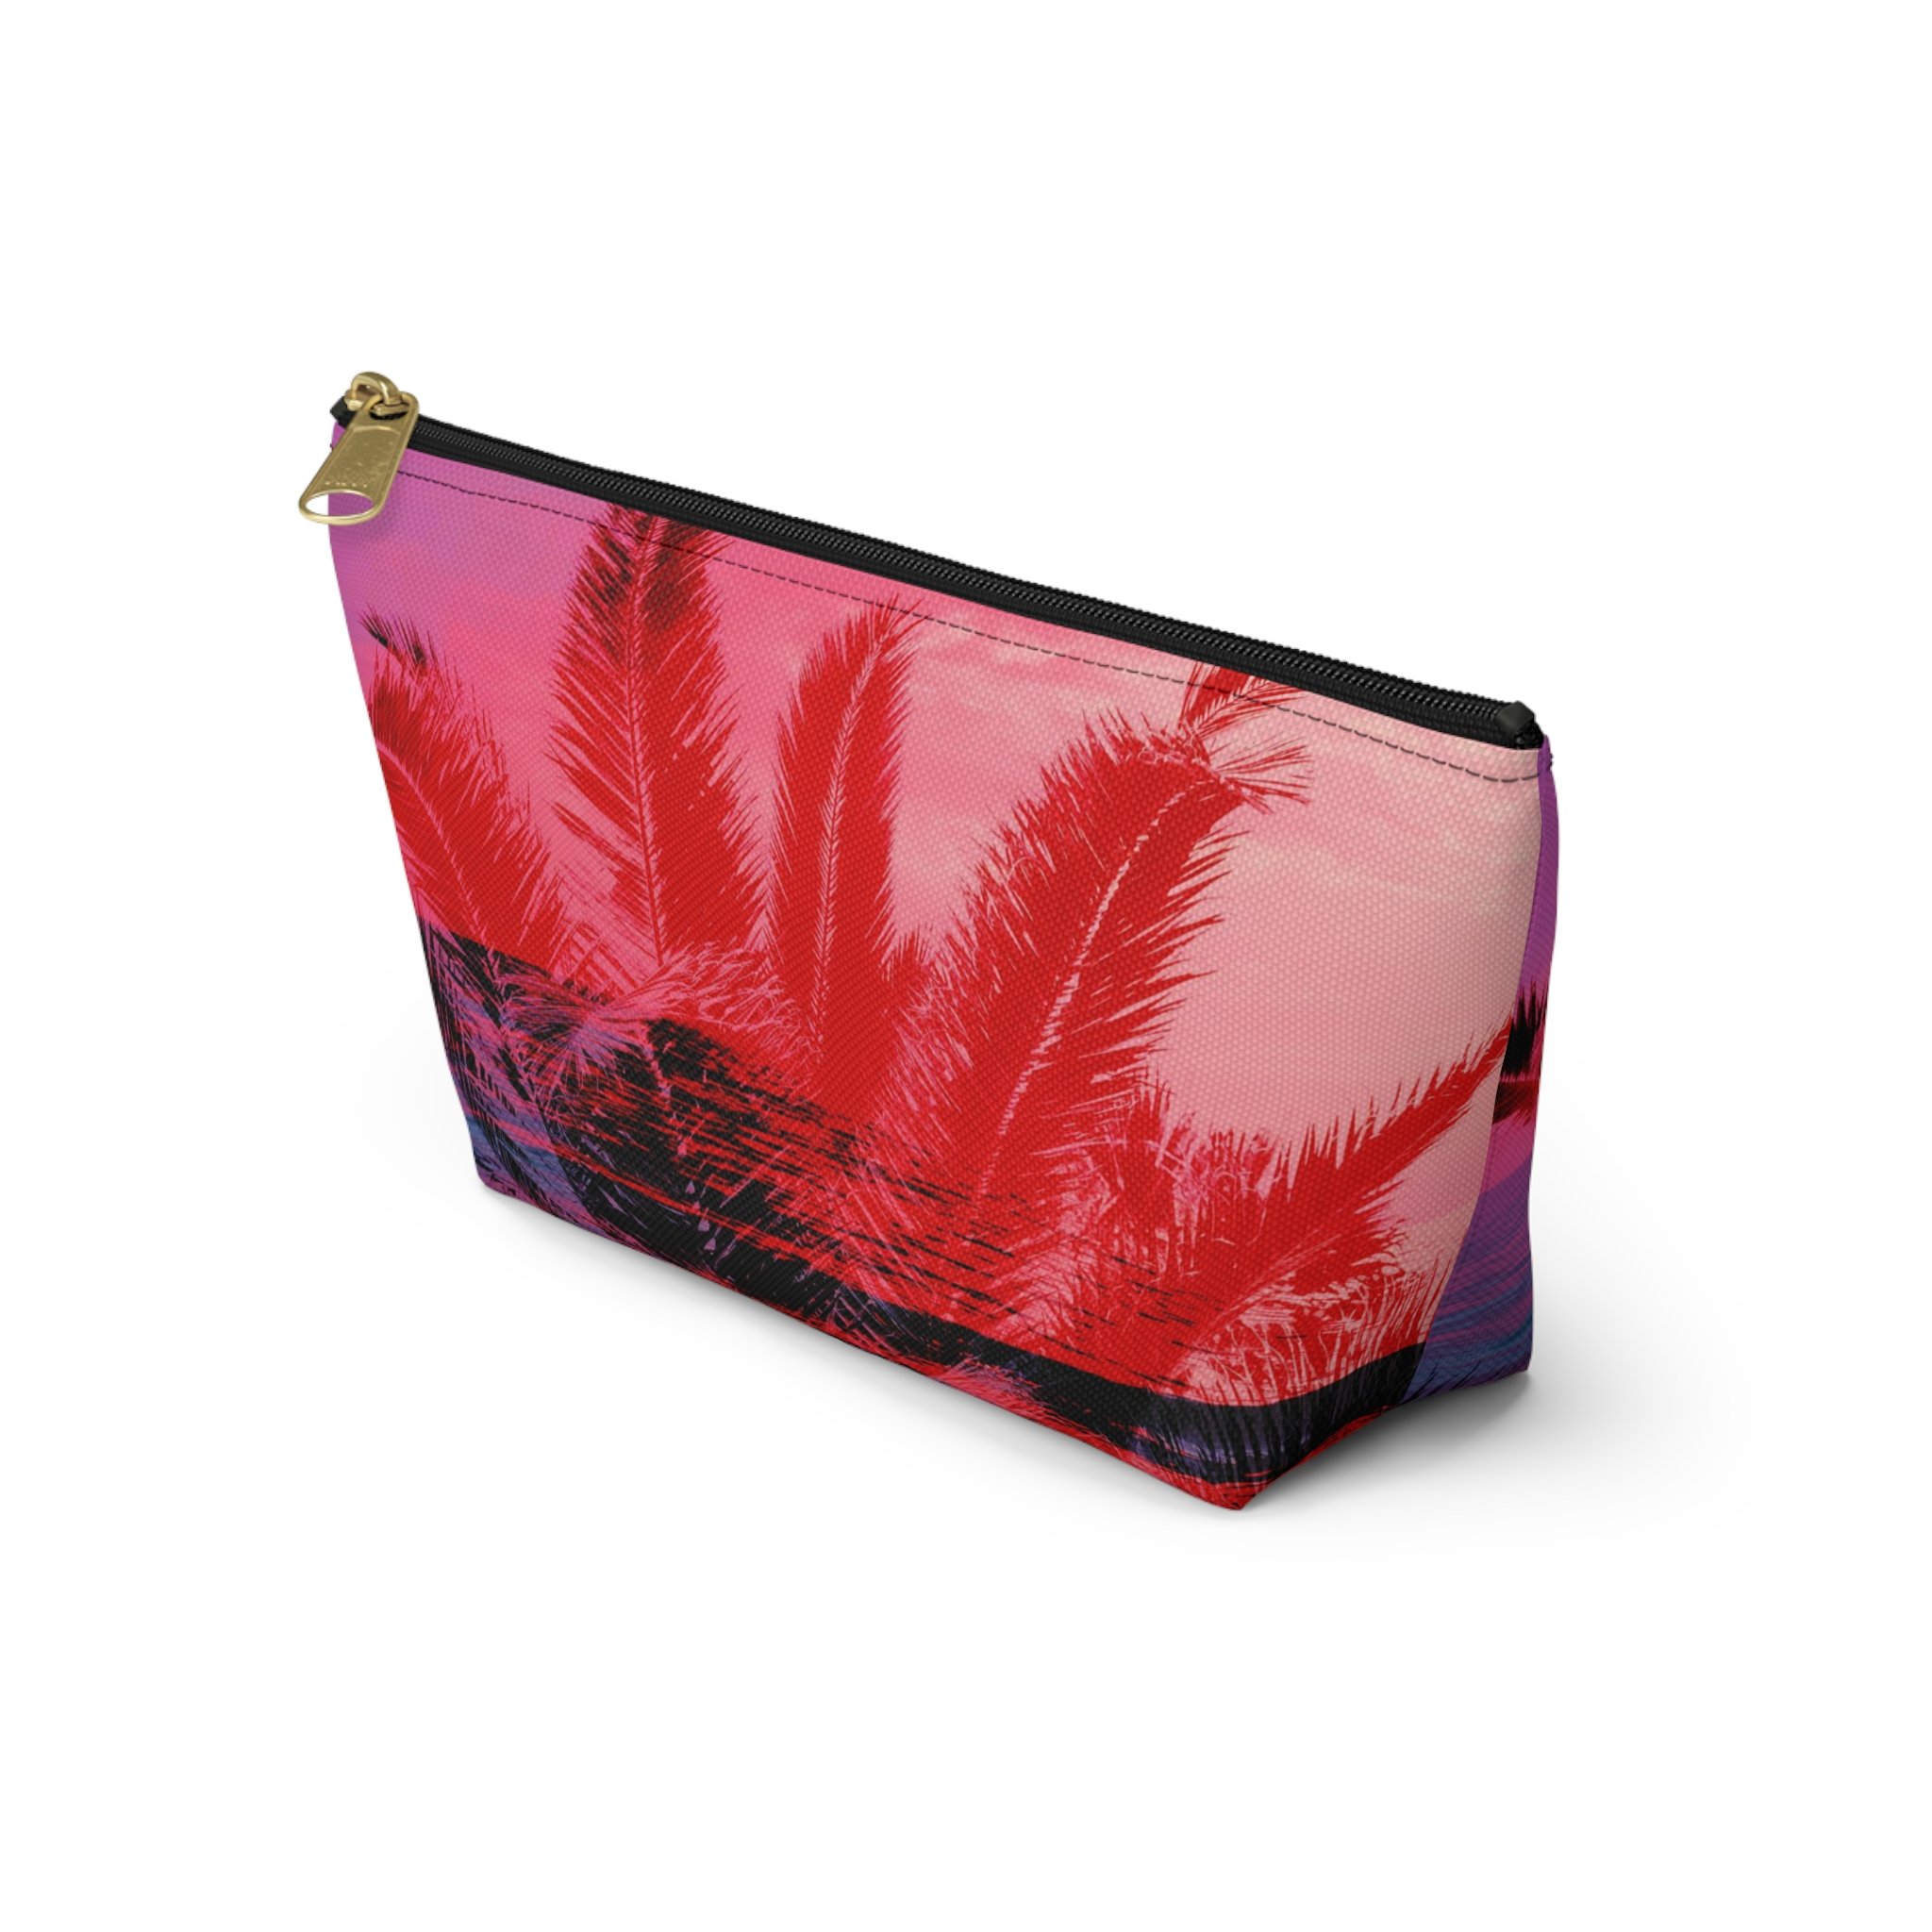 Flamingo Palms - Carry-All Pouch — Beach Surf Decor by Nature | City Co.